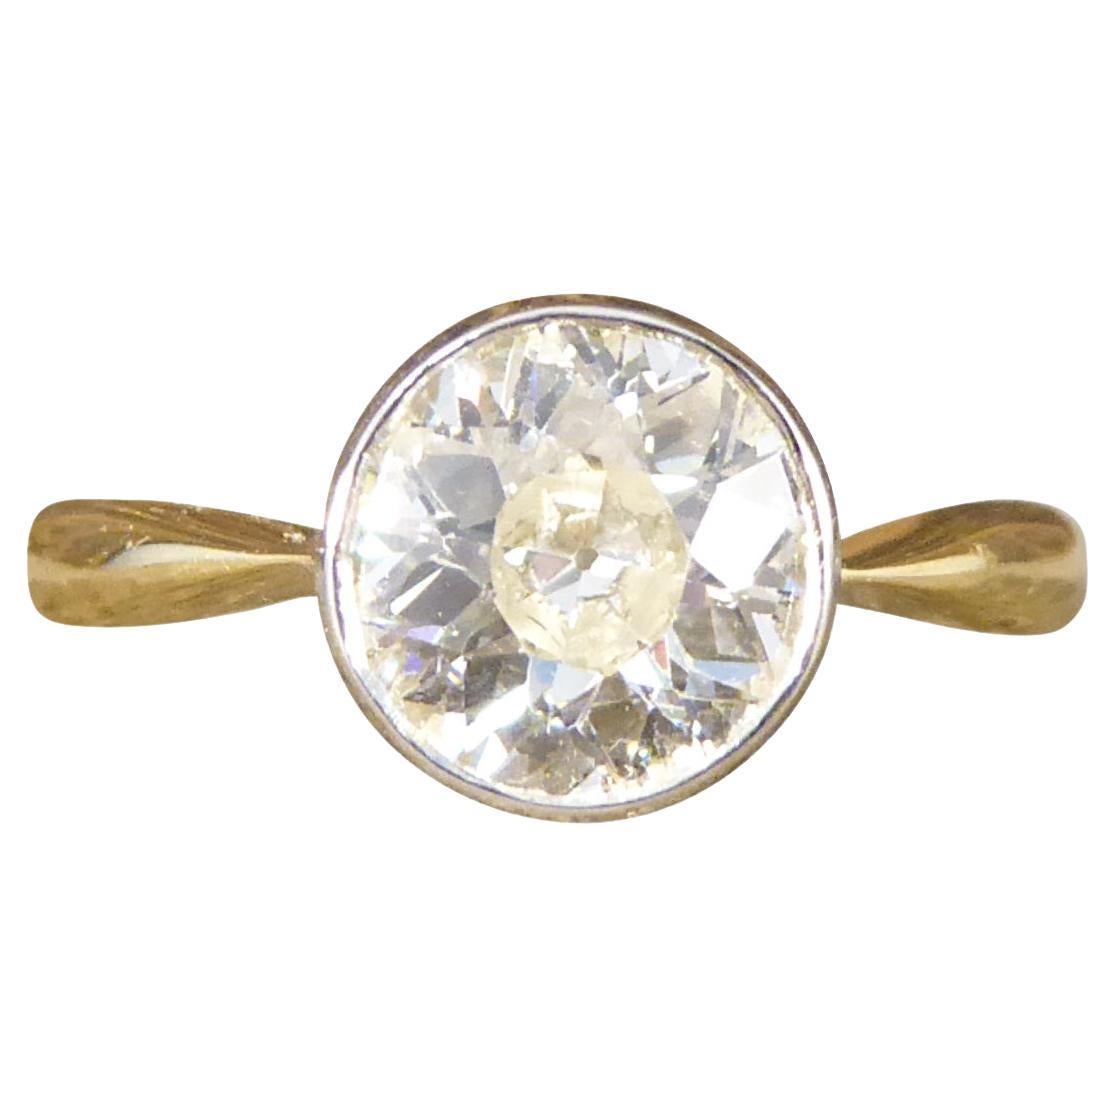 1.25ct Diamond Solitaire Bezel Set Engagement Ring in 18ct Yellow Gold and Plat